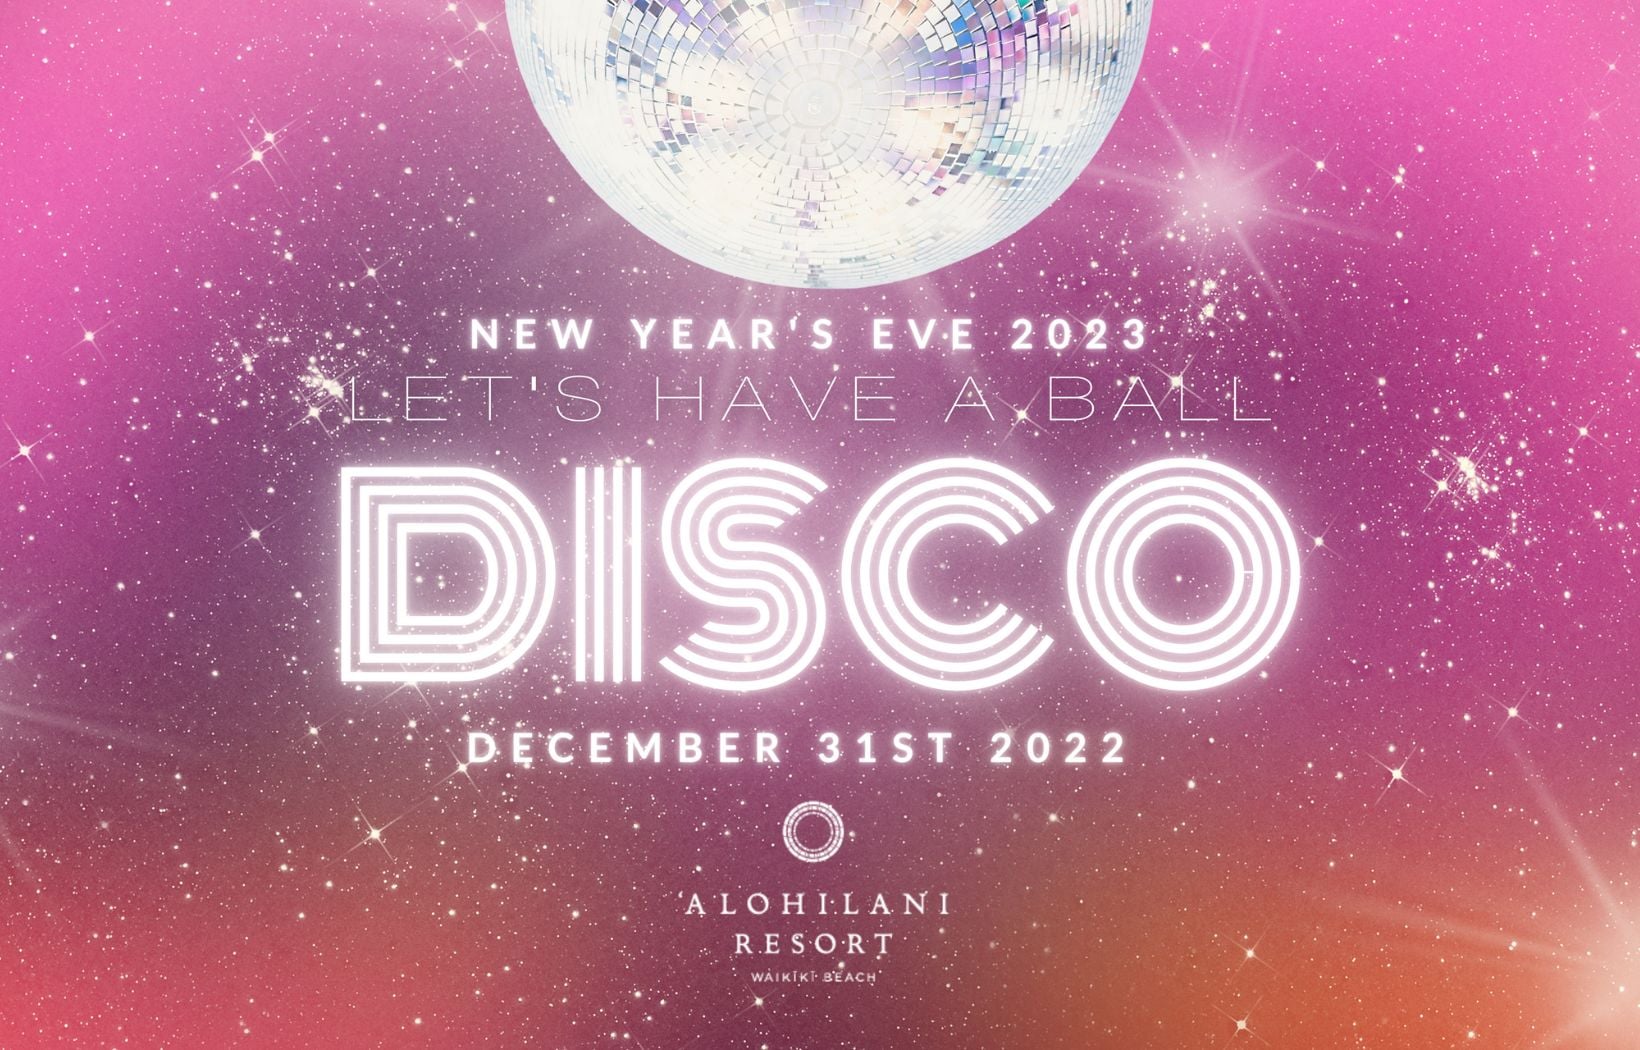 New Year's Eve Let's have a ball text with disco ball graphic